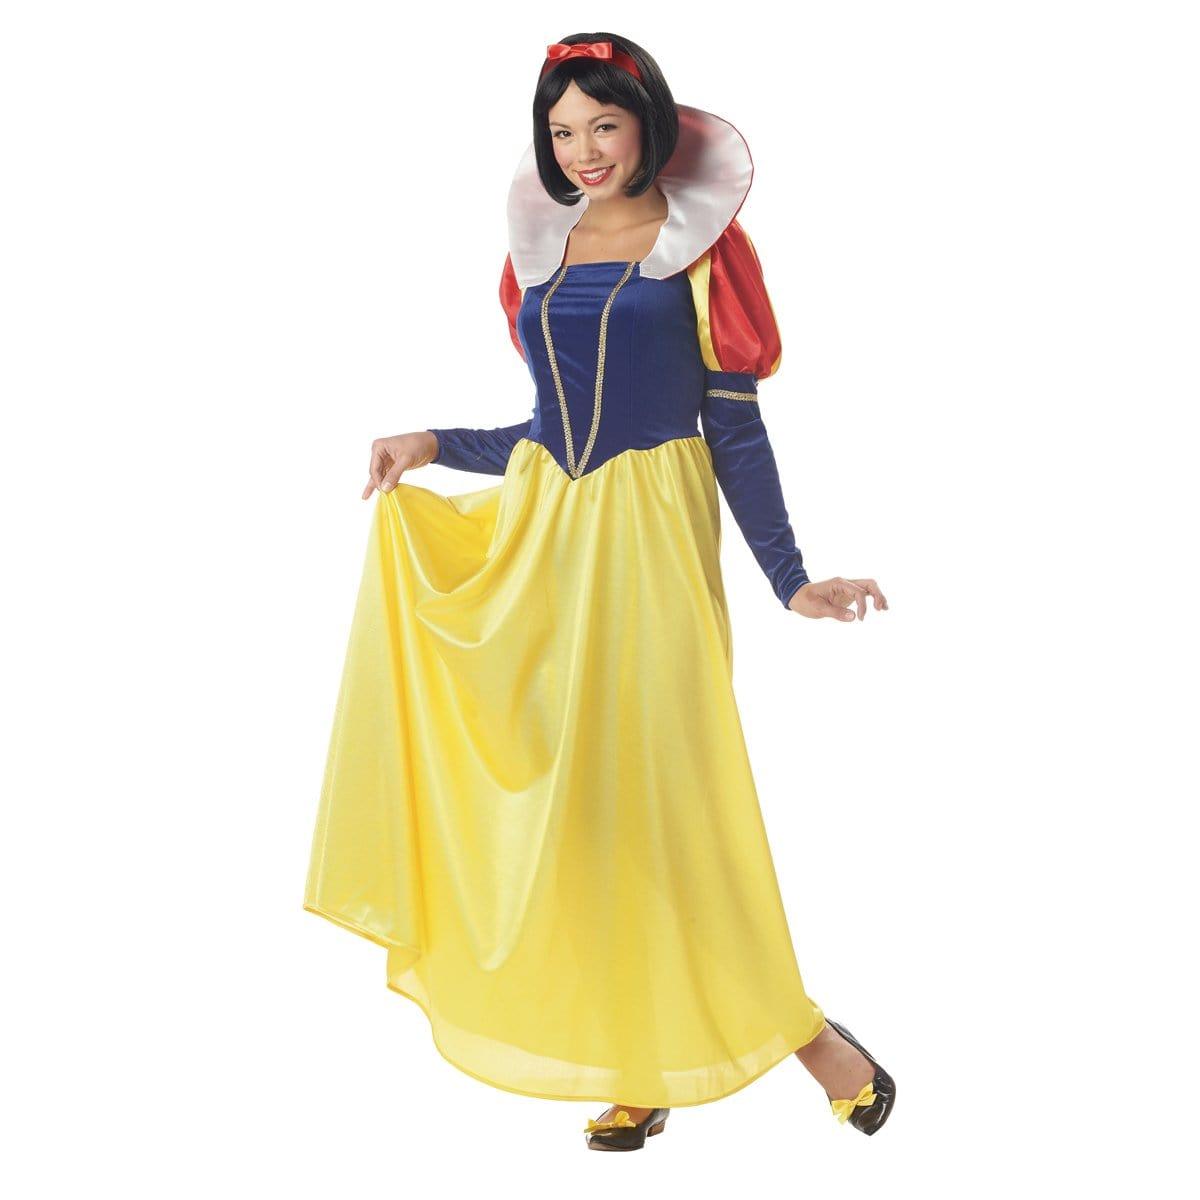 Buy Costumes Snow White costume for Adults, Snow White and the Seven Dwarfs sold at Party Expert